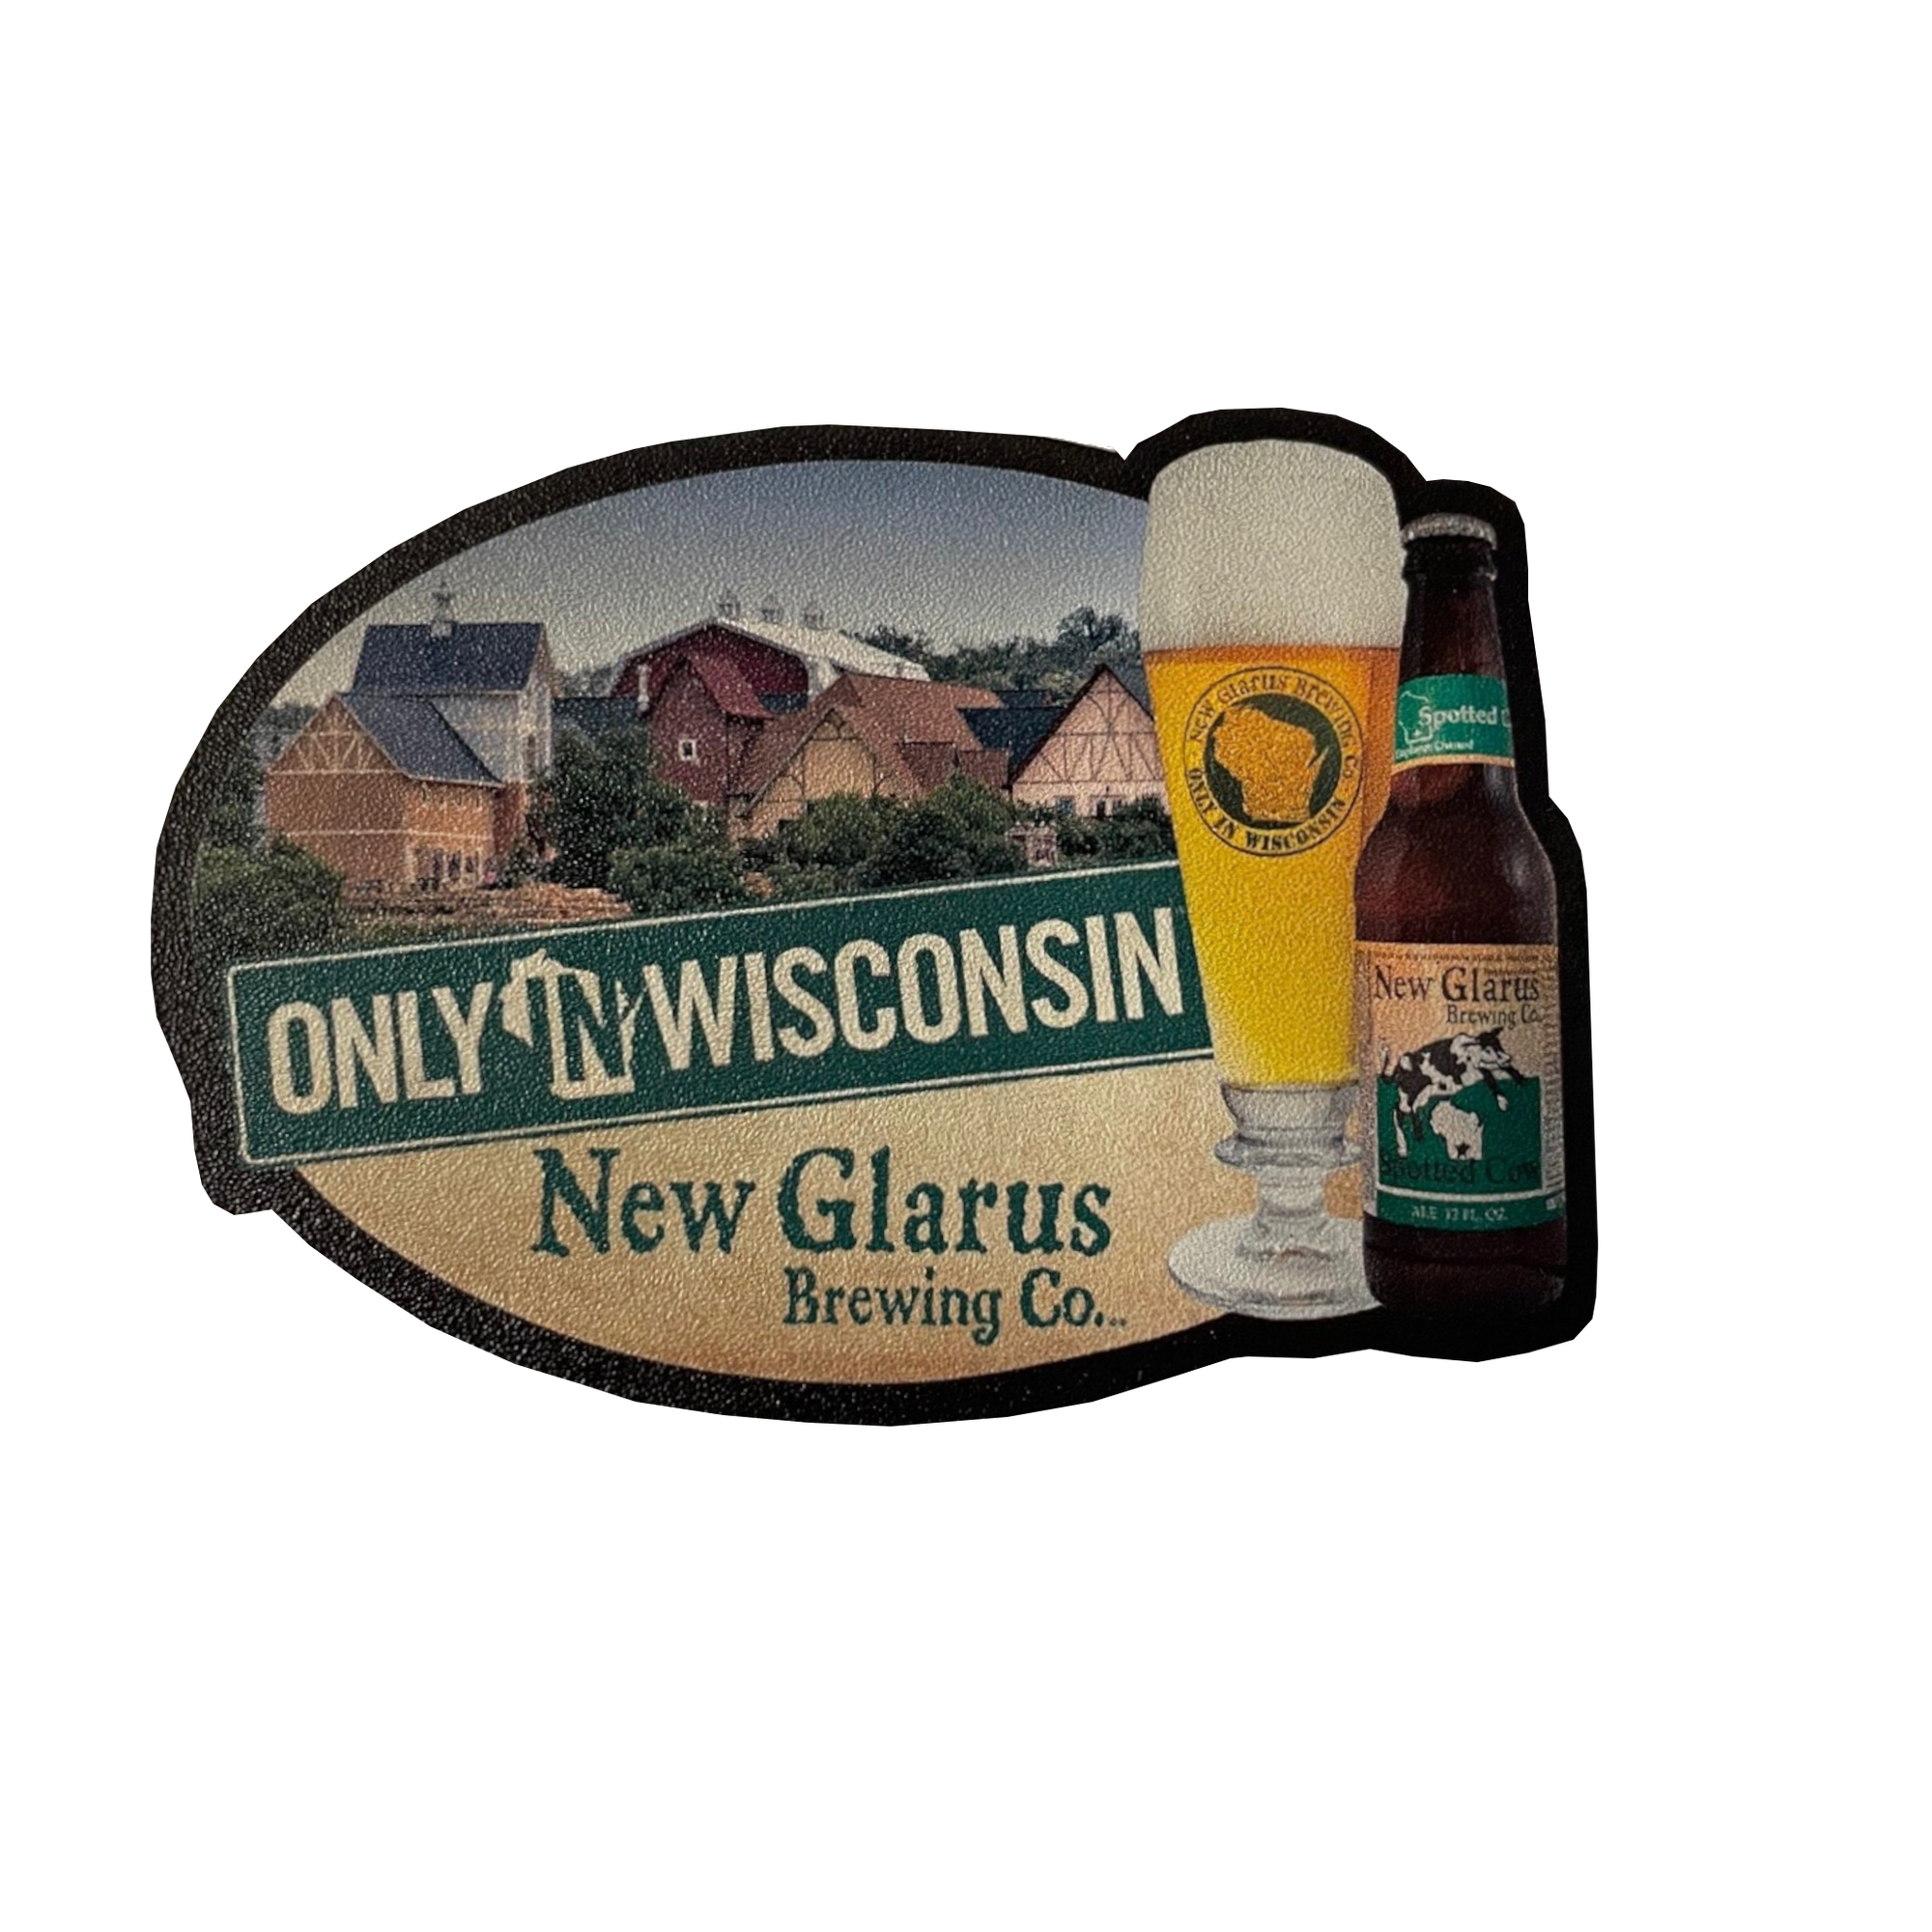 Oval wooden magnet with a photo of the brewery and a bottle and pilsner glass of Spotted Cow. Across the middle is a green banner that says Only in Wisconsin and New Glarus Brewing Co.